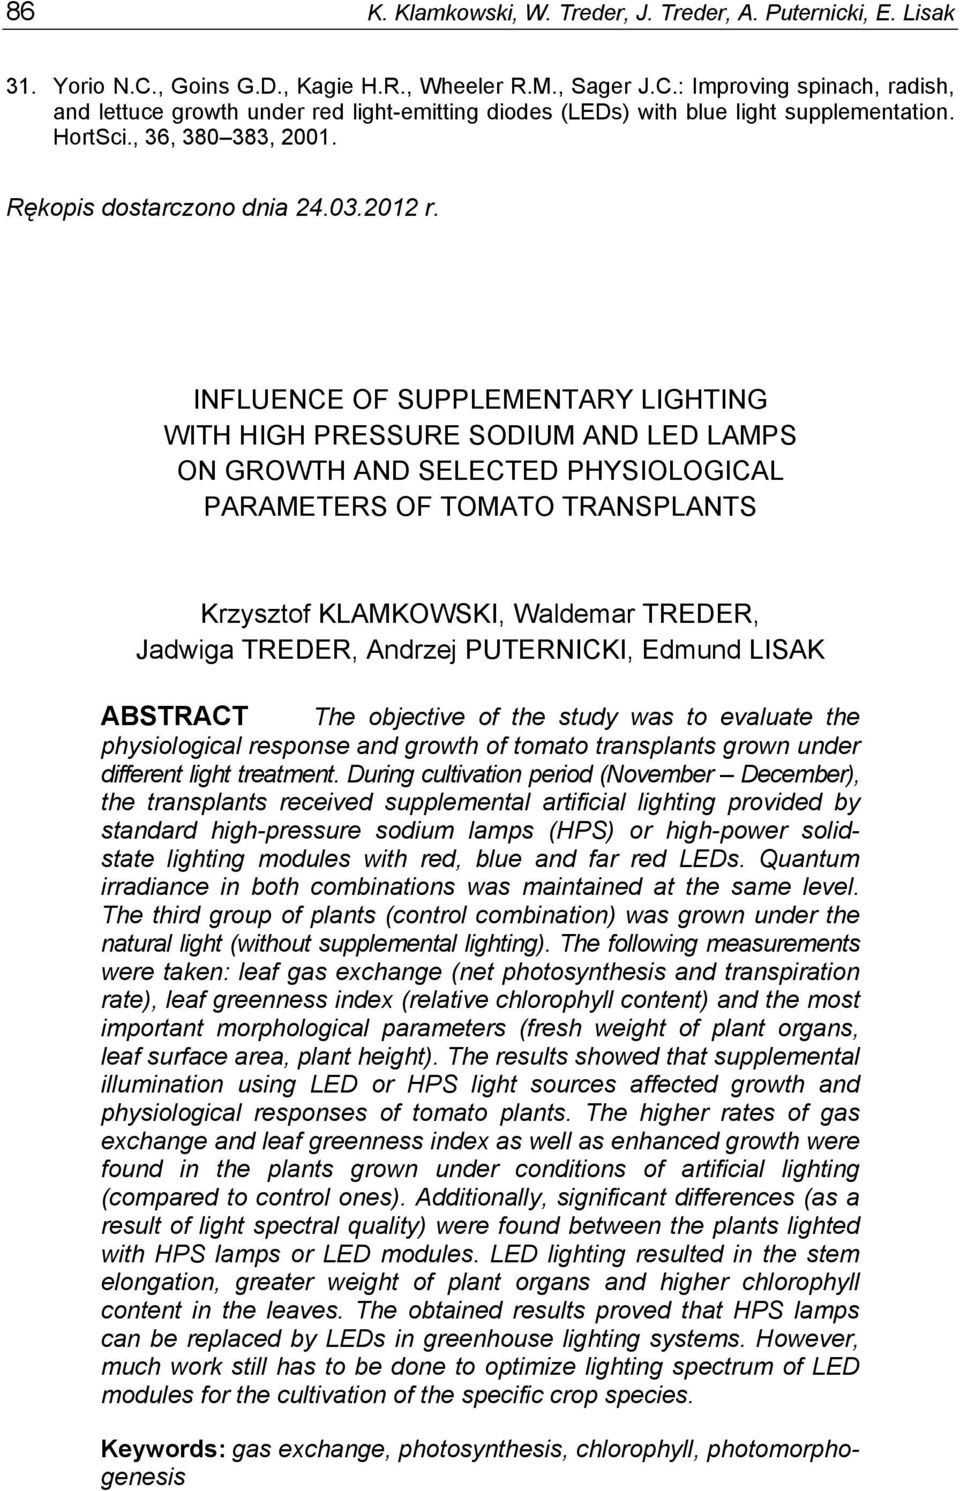 INFLUENCE OF SUPPLEMENTARY LIGHTING WITH HIGH PRESSURE SODIUM AND LED LAMPS ON GROWTH AND SELECTED PHYSIOLOGICAL PARAMETERS OF TOMATO TRANSPLANTS Krzysztof KLAMKOWSKI, Waldemar TREDER, Jadwiga